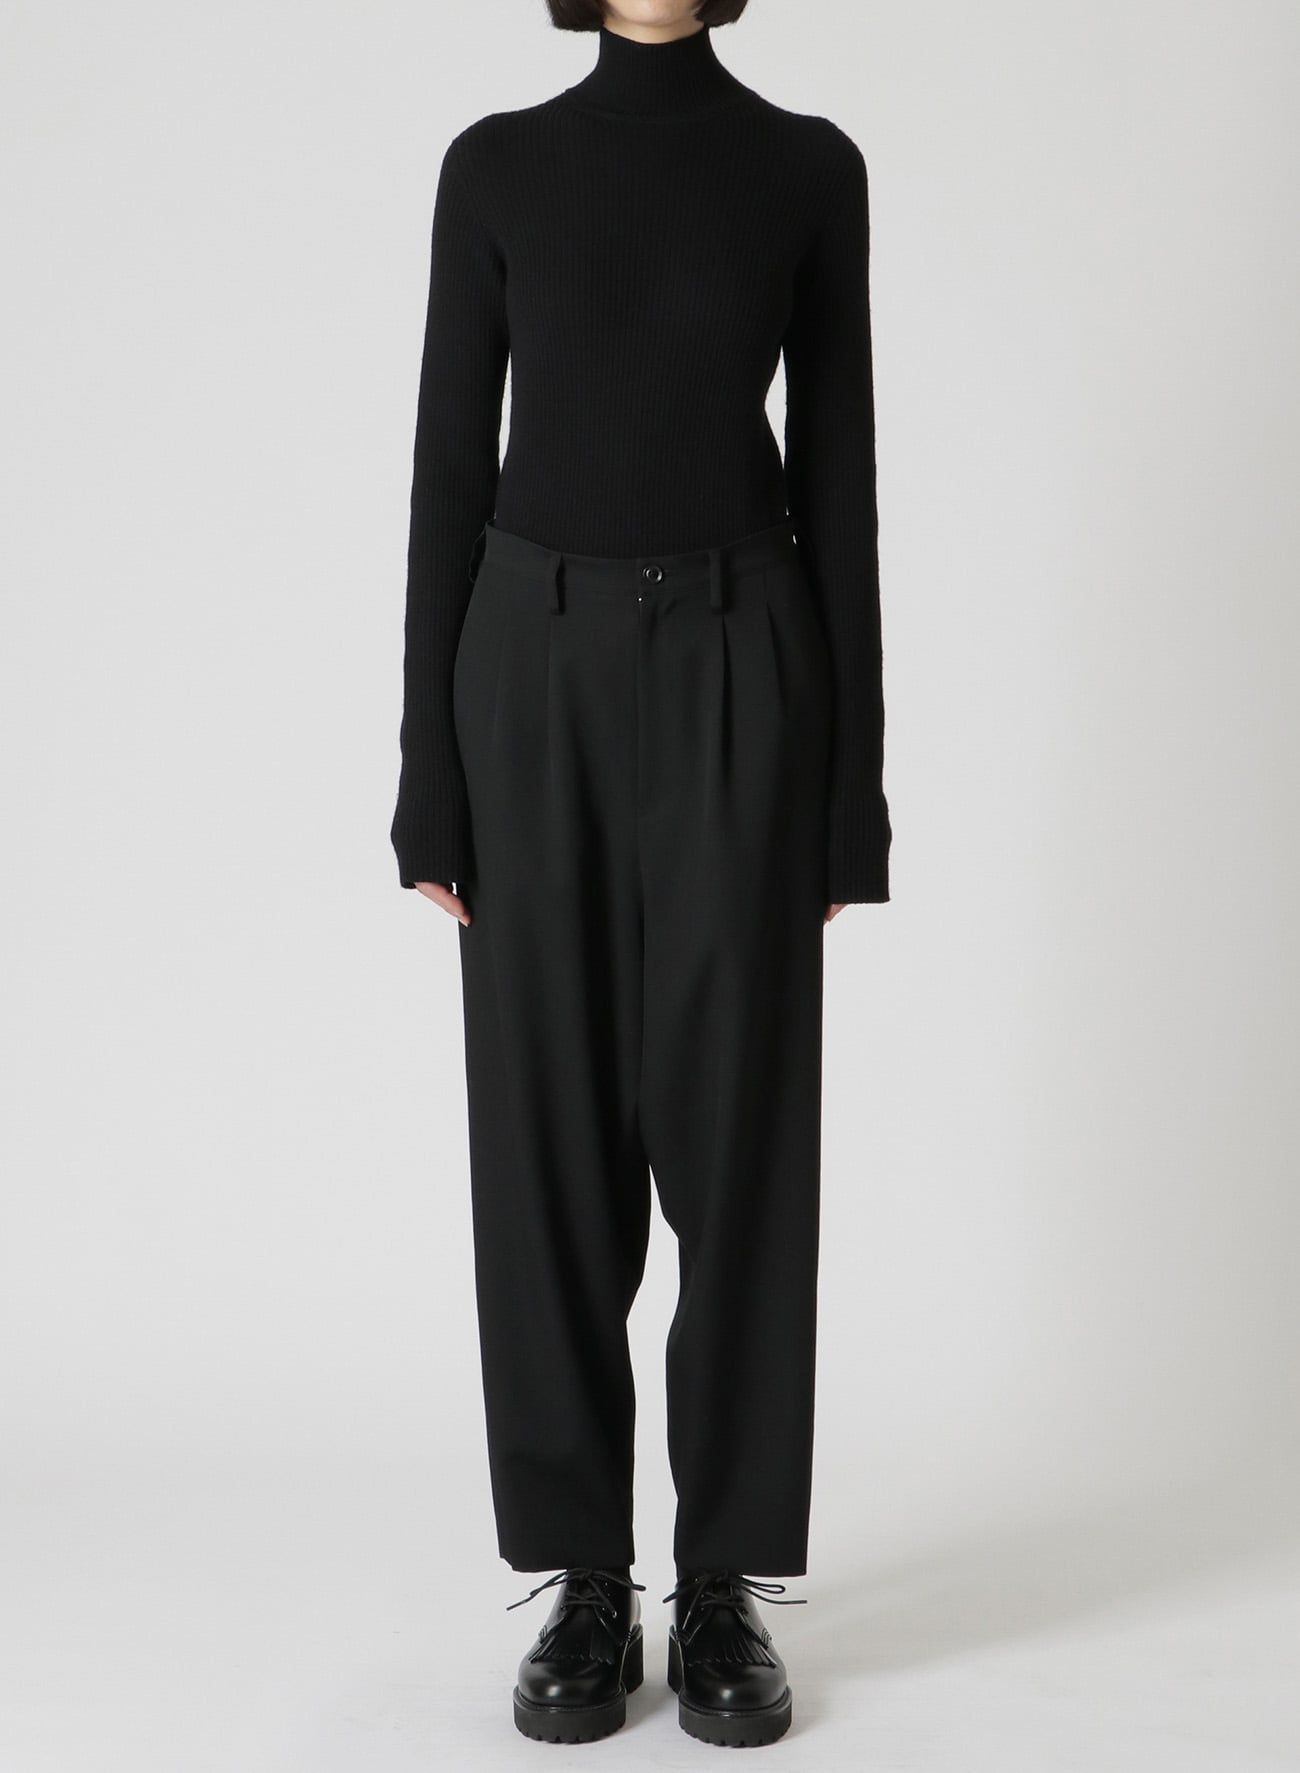 WOOL GABARDINE TAPERED DOUBLE PLEATED PANTS(XS Black): Y's｜THE